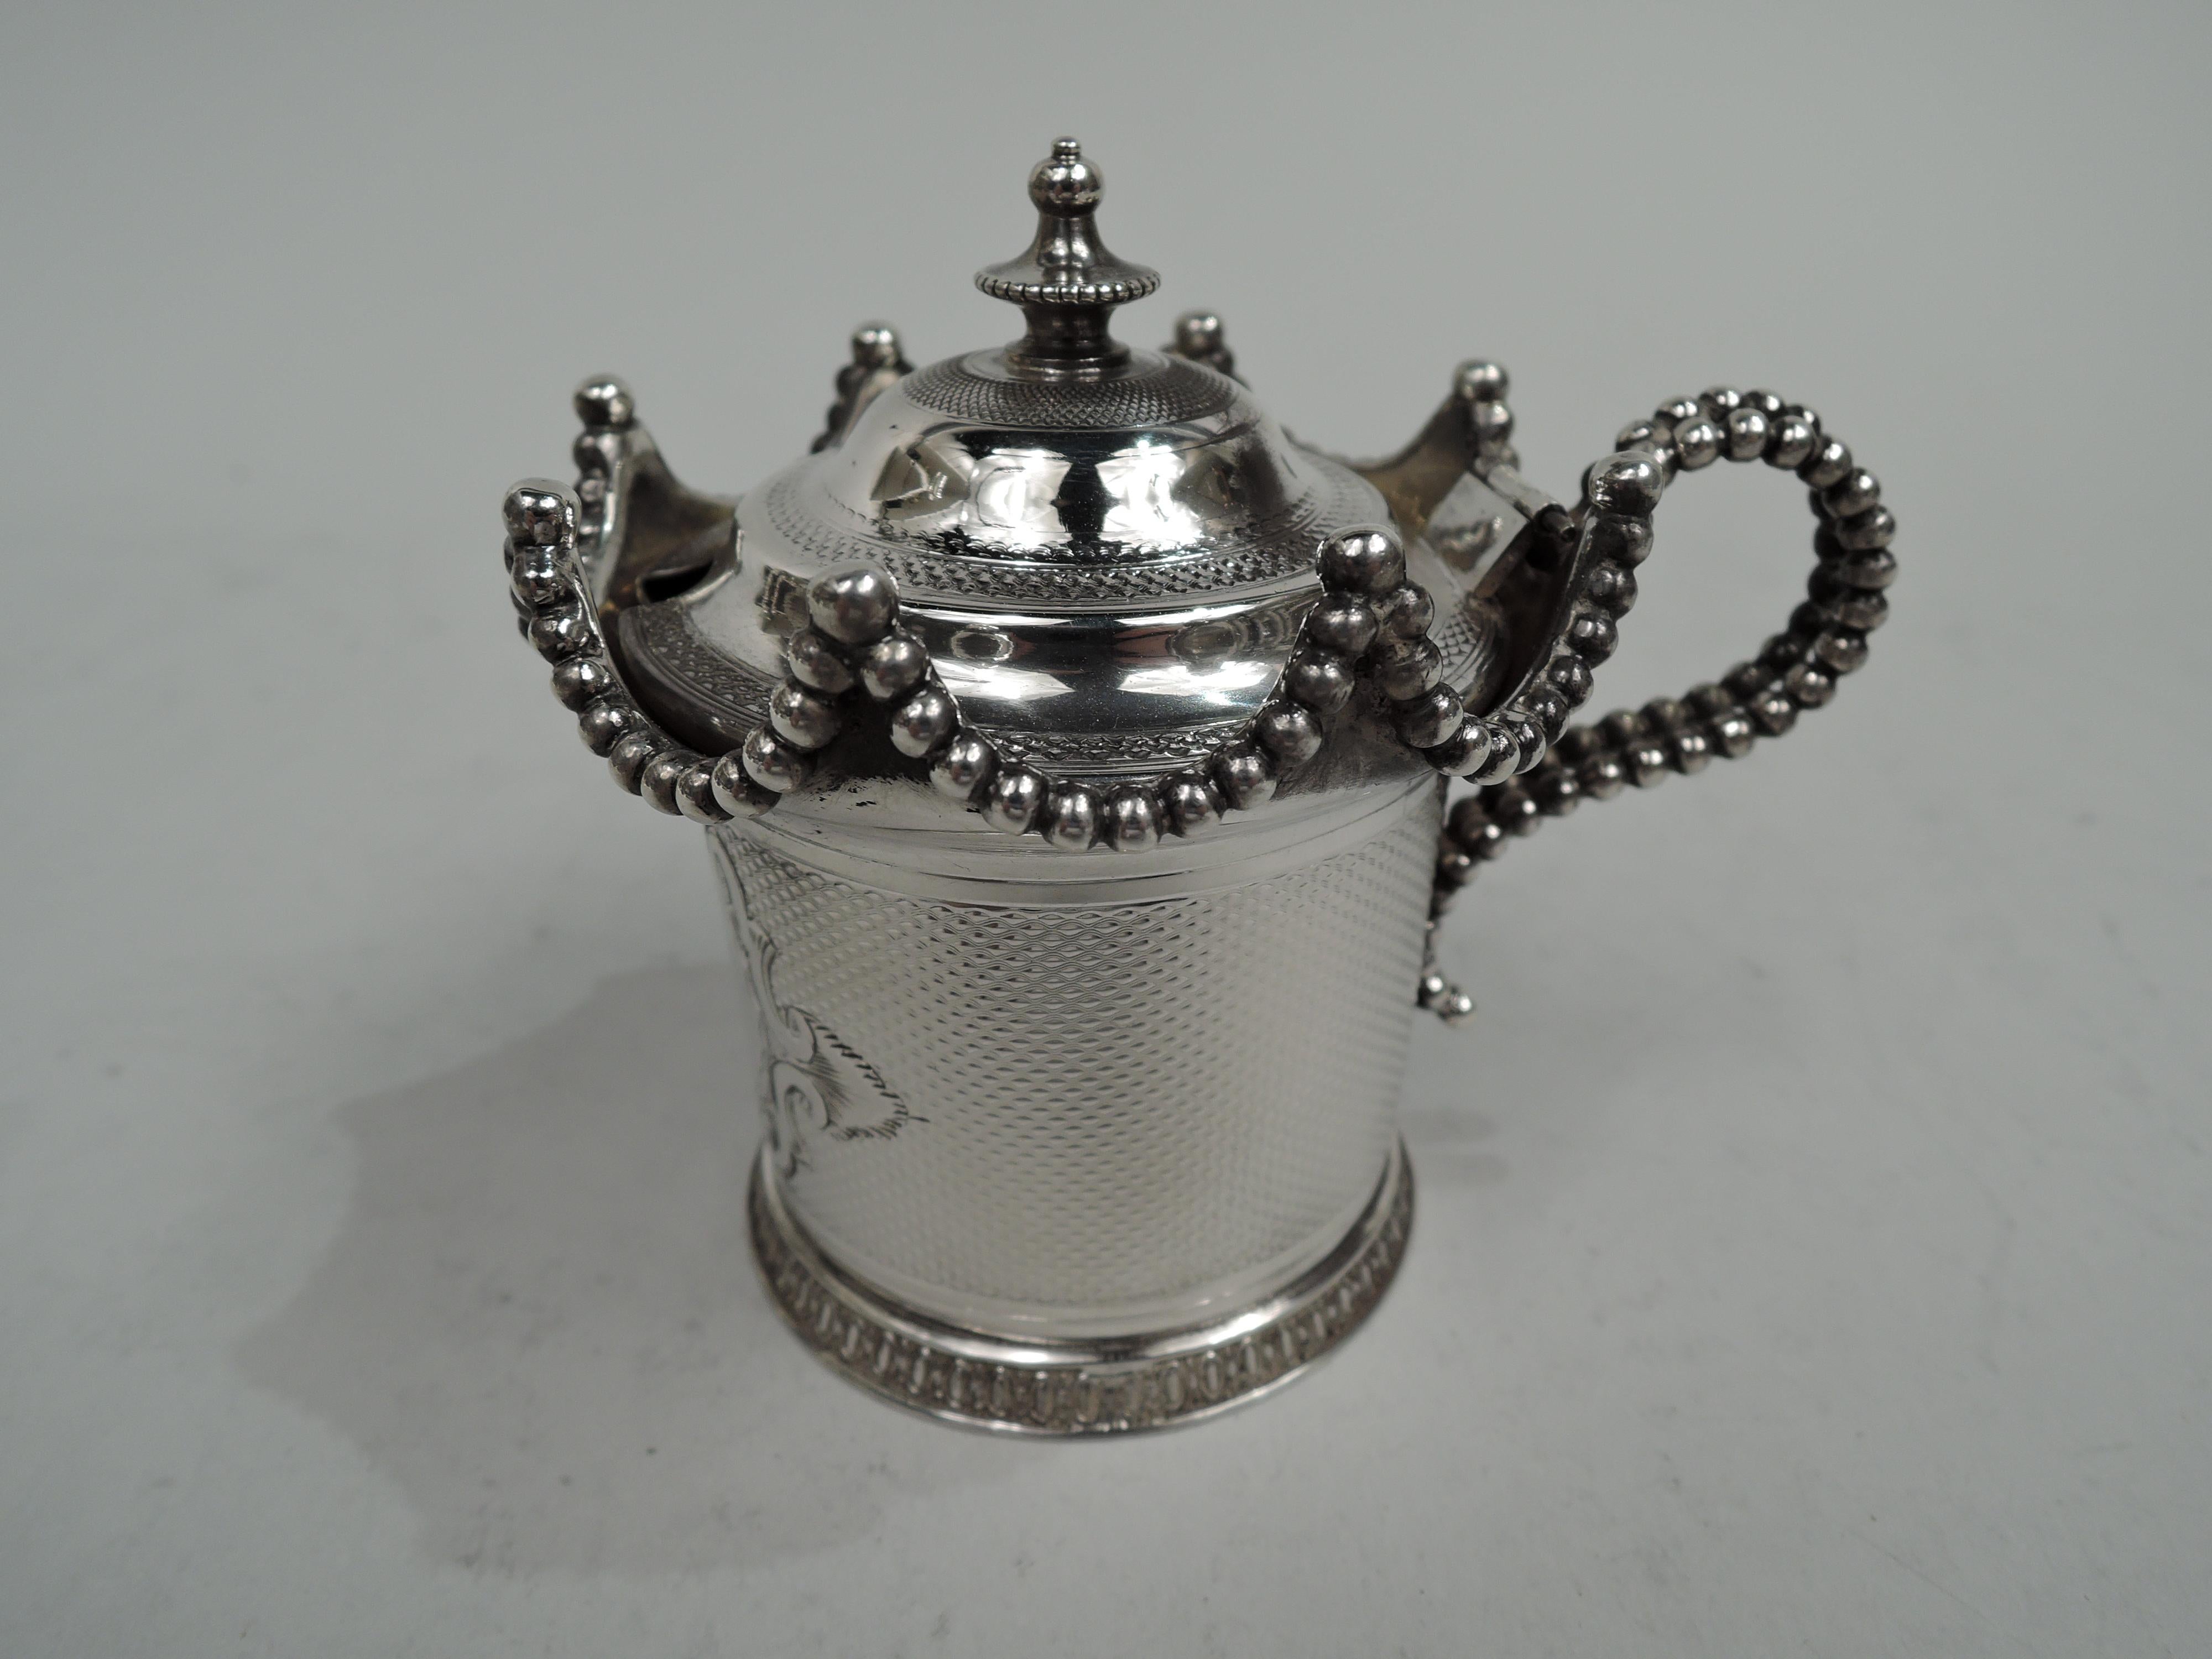 American Classical New York Classical Coin Silver Mustard Pot by Wood & Hughes